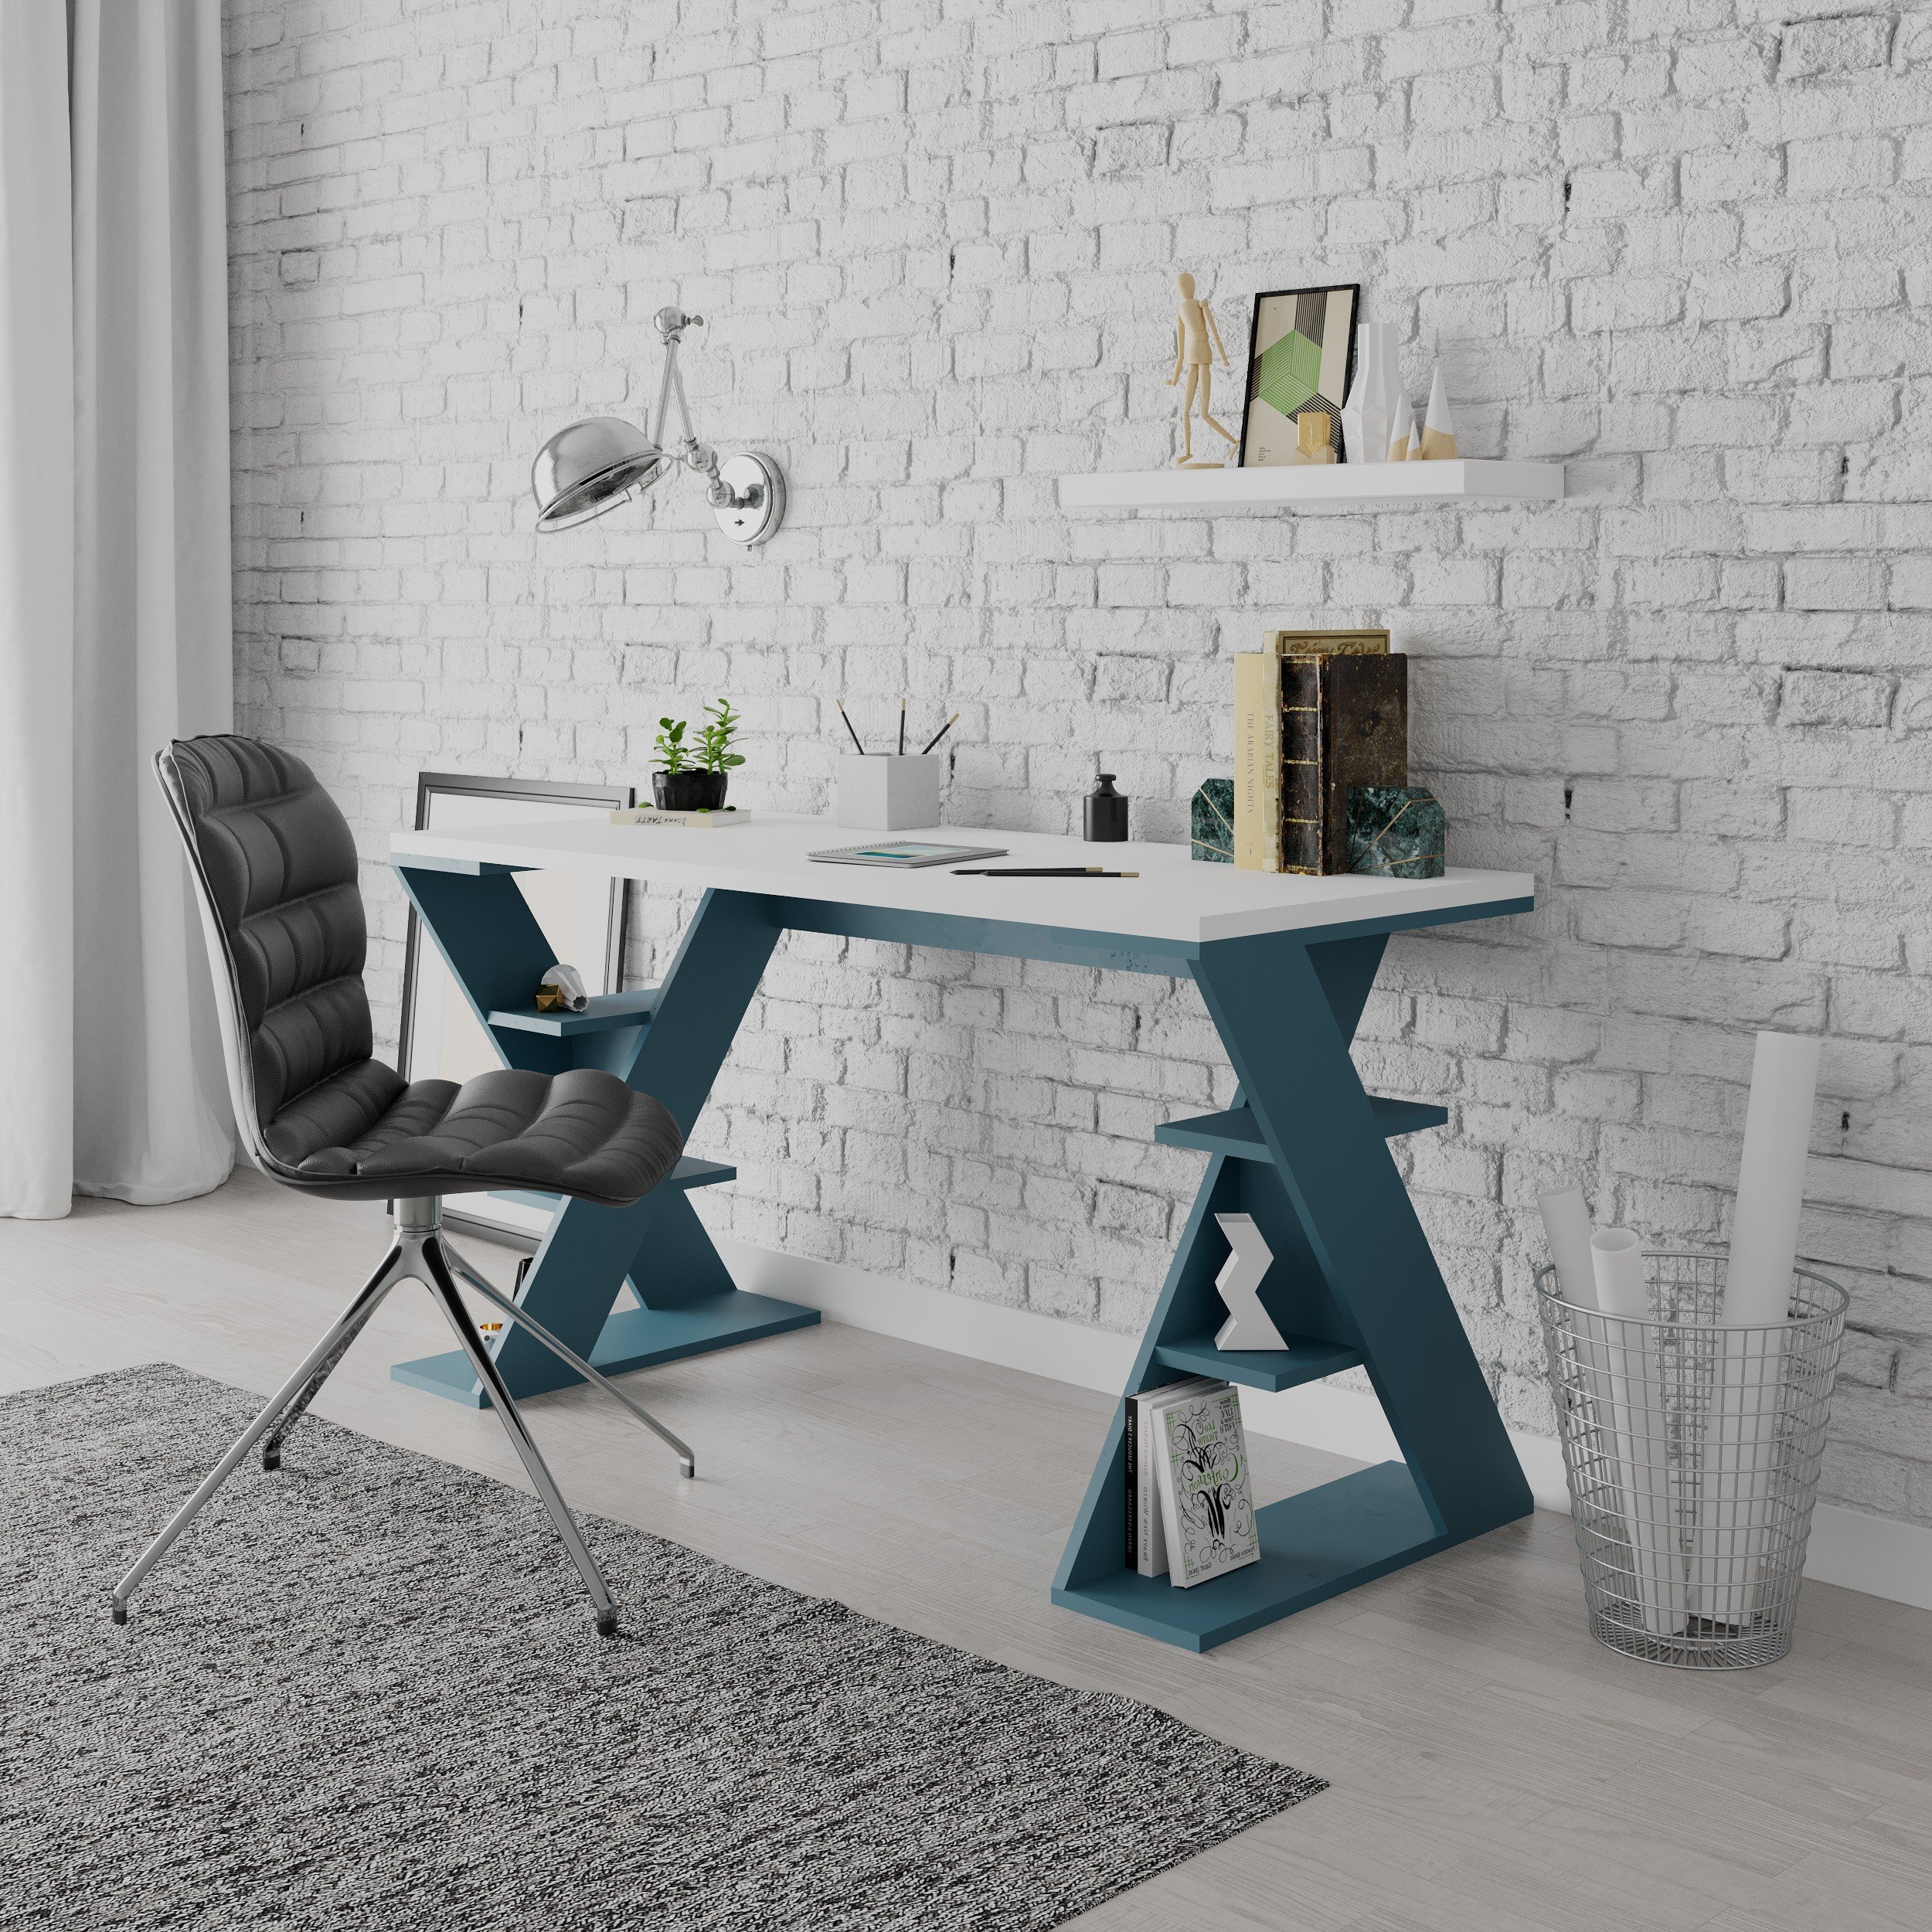 PAPILLON WORKING TABLE - WHITE - TURQUOISE M.MS.12599.7